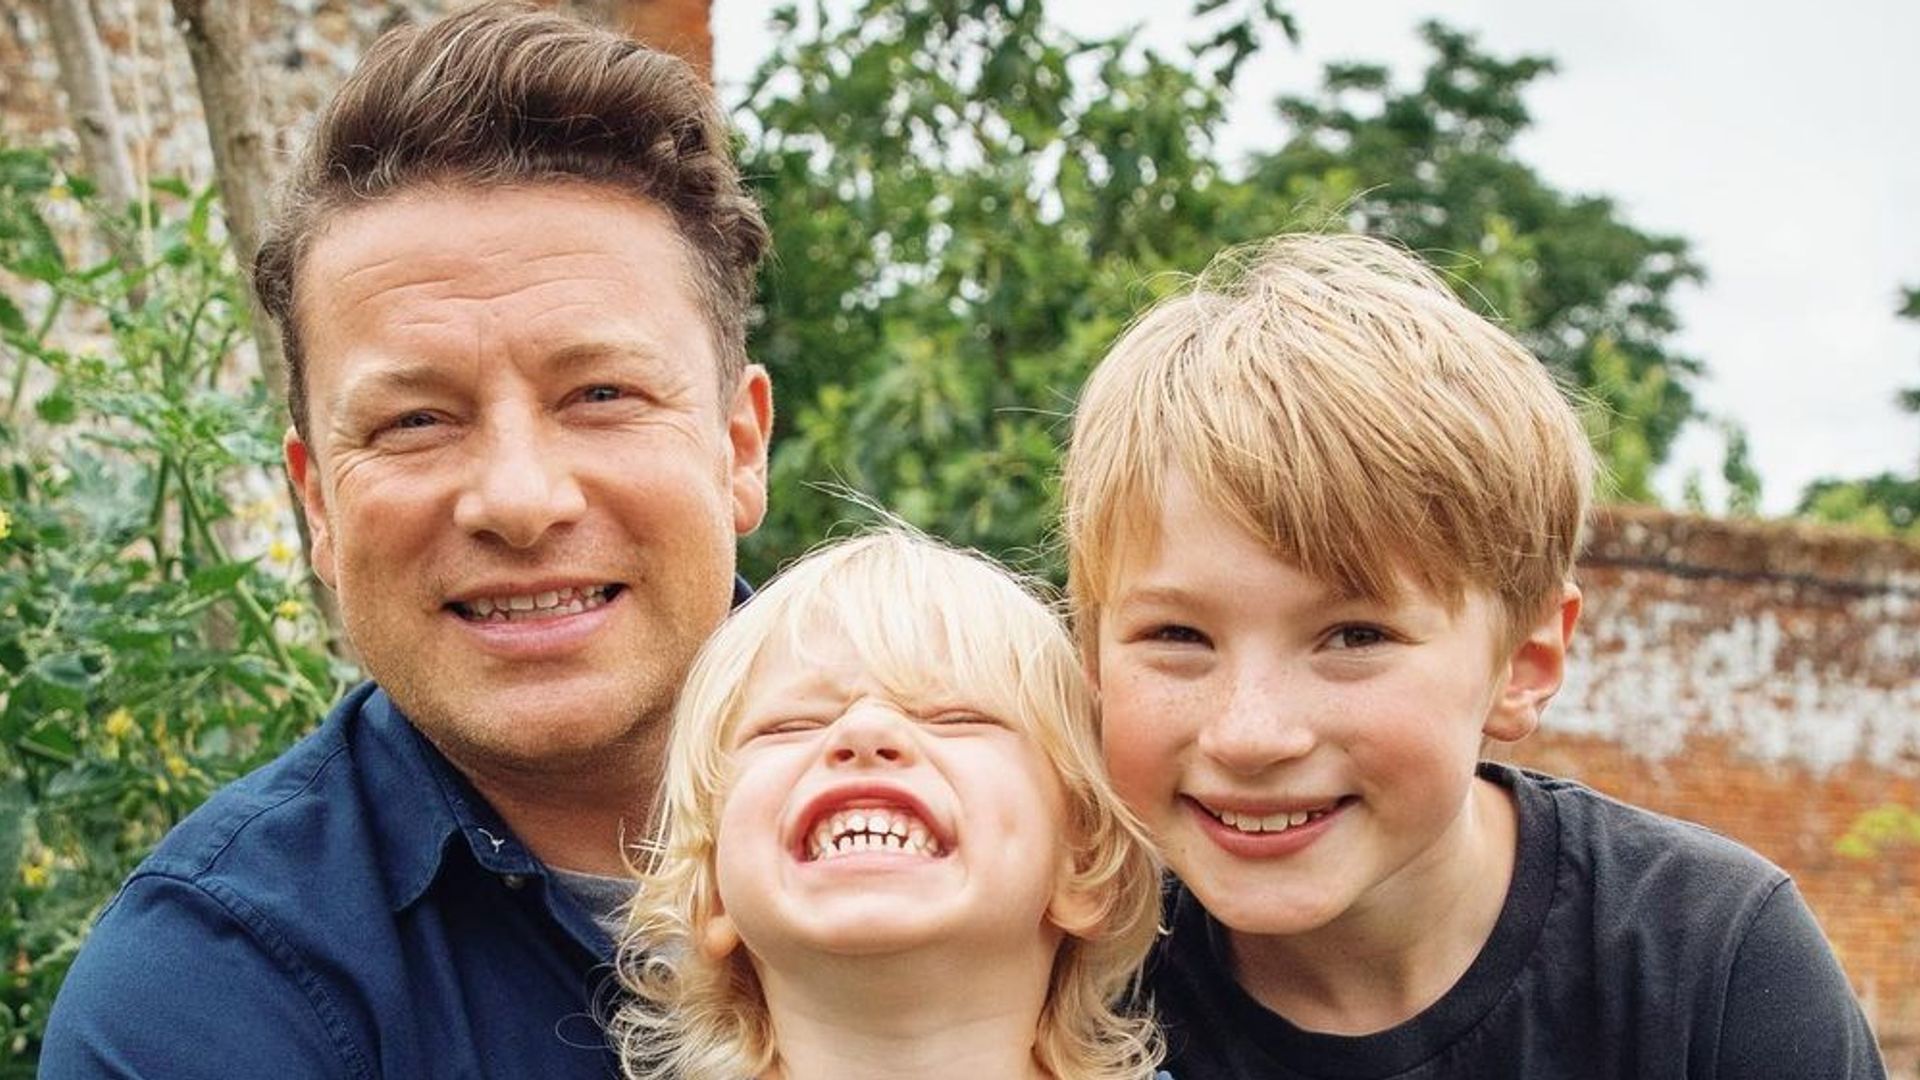 Jamie Oliver's lookalike sons are their dad's double in adorable new photo